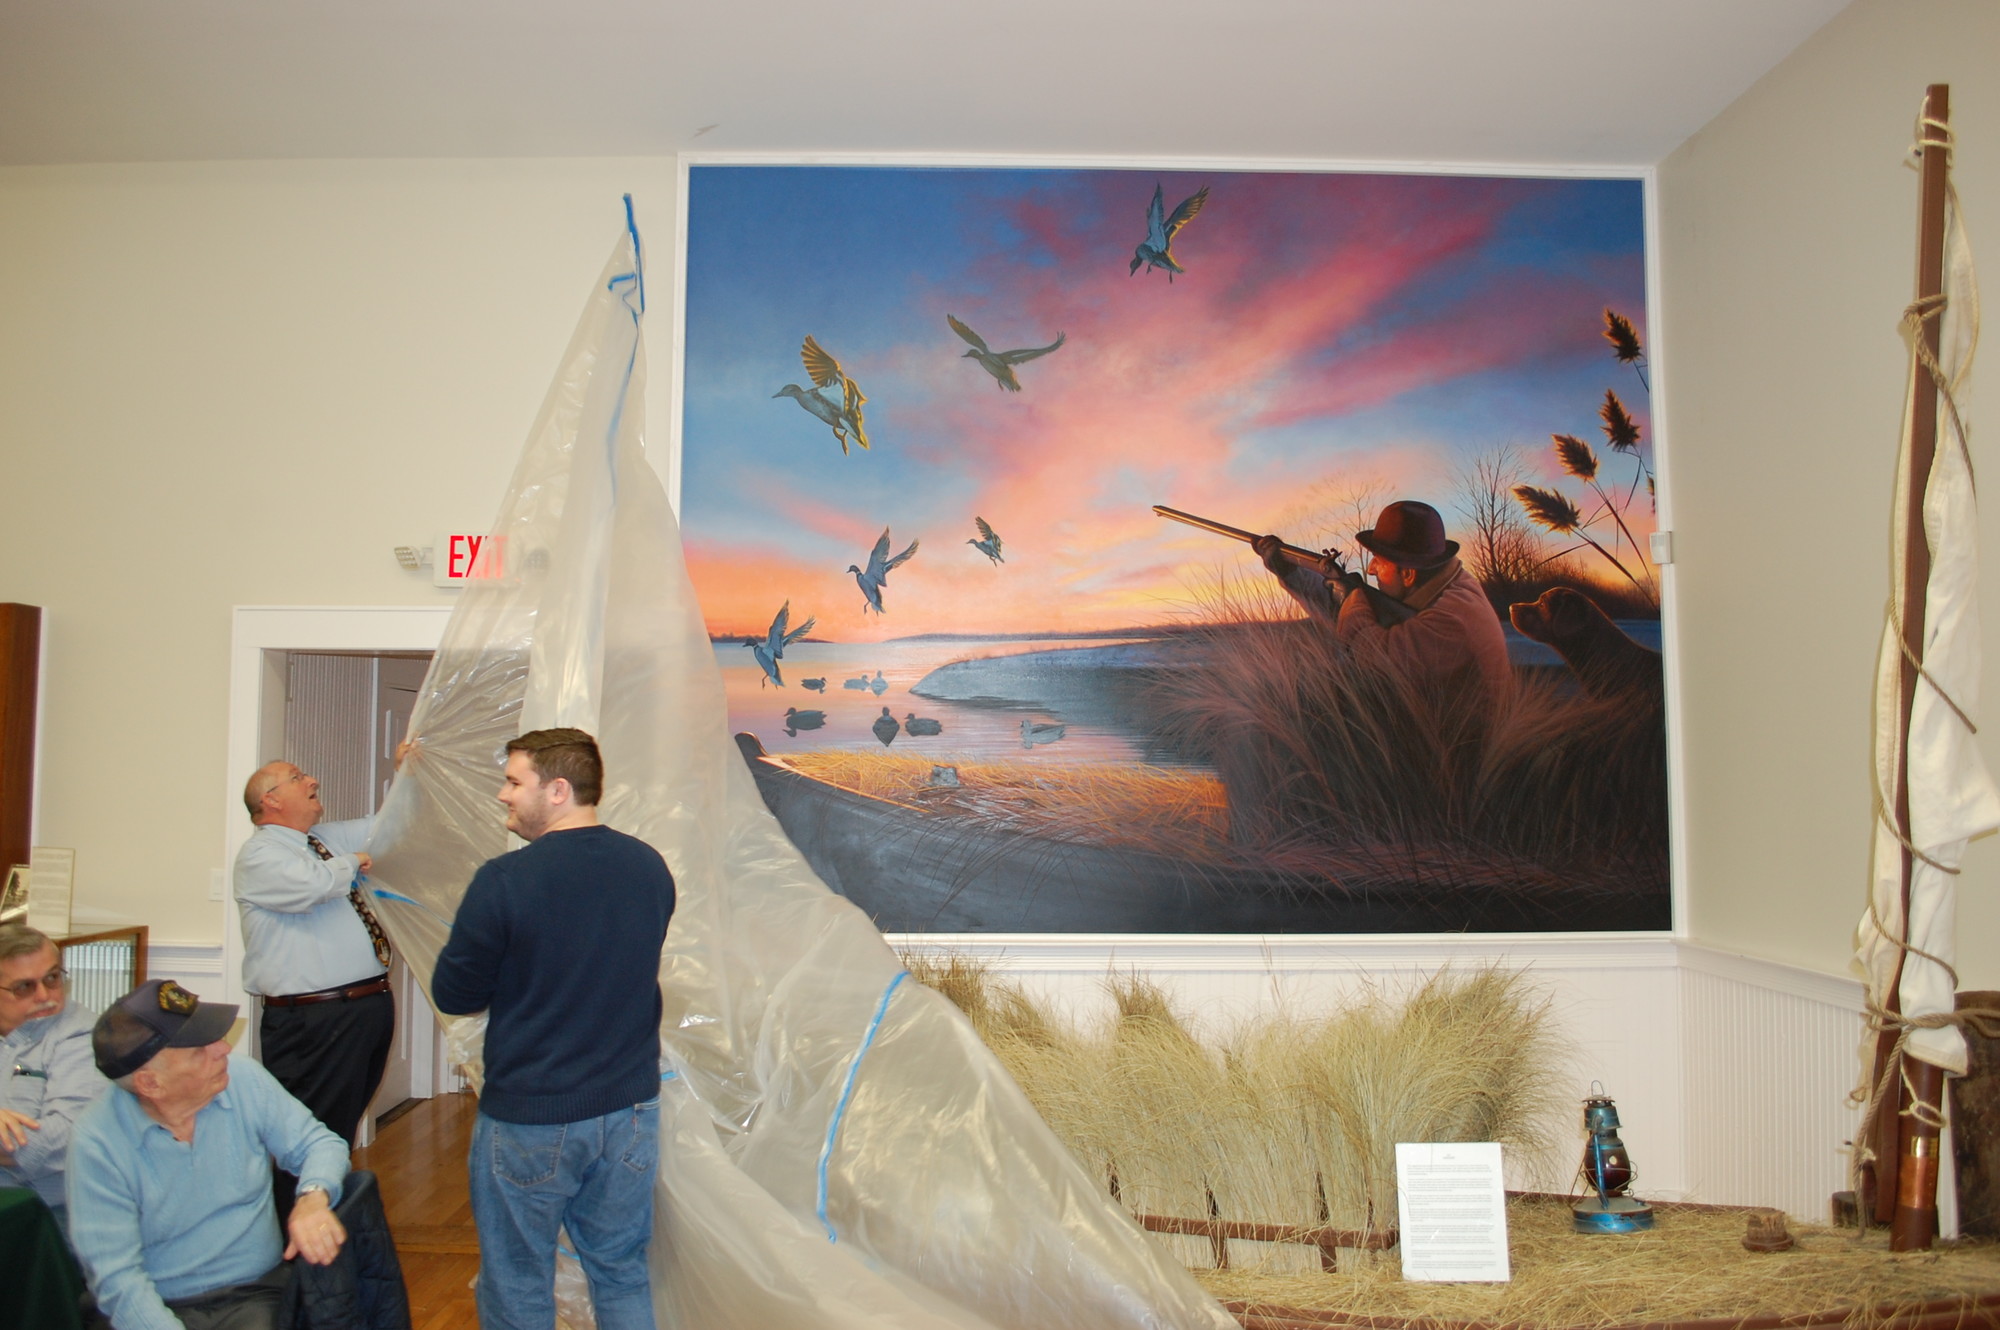 Historical Society officers Steve Bongiovi, left, and Patrick Martz unveiled the mural that depicts duck hunting in Seaford in the early 1900s.